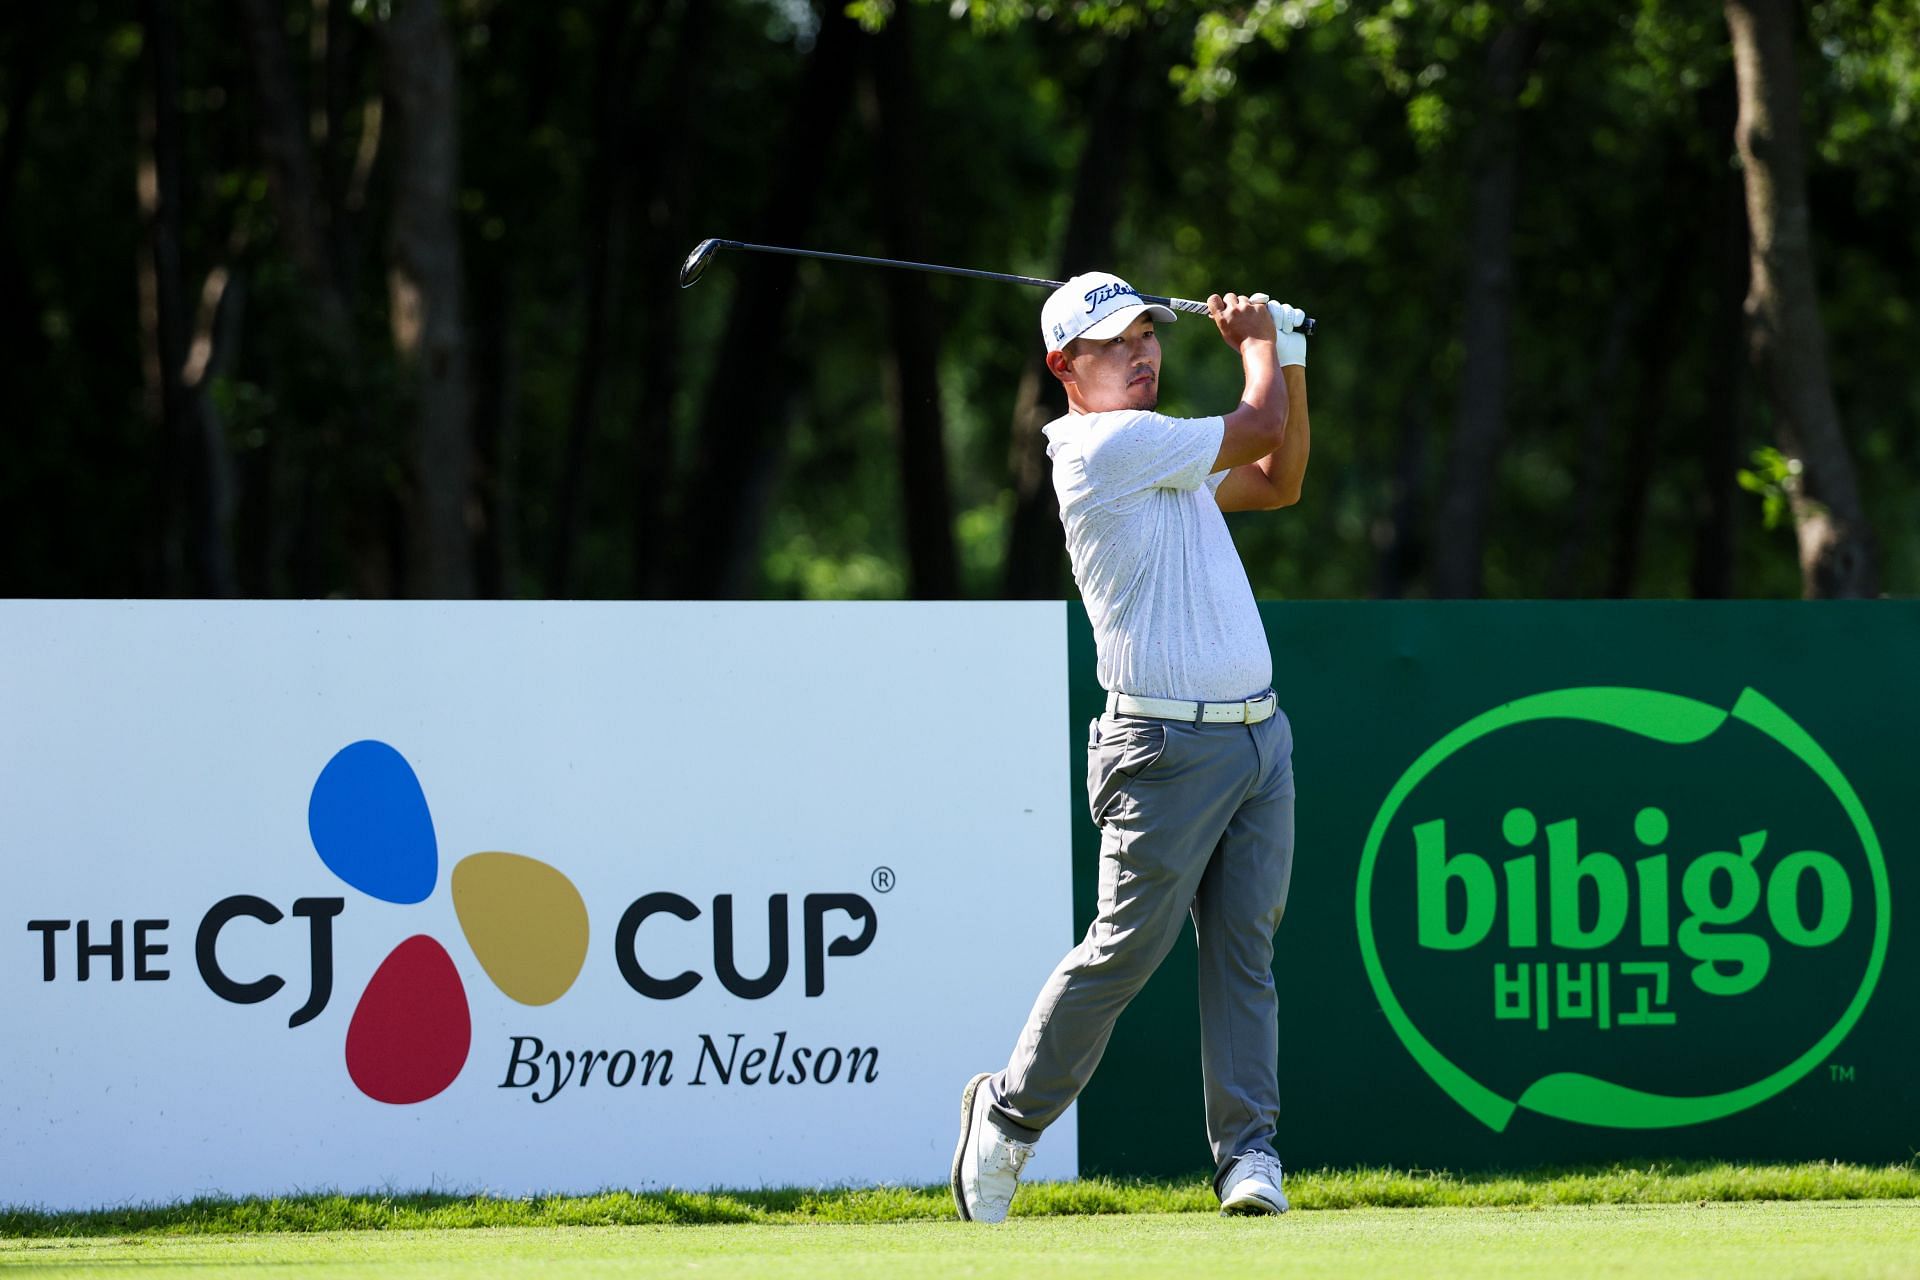 THE CJ CUP Byron Nelson - Previews